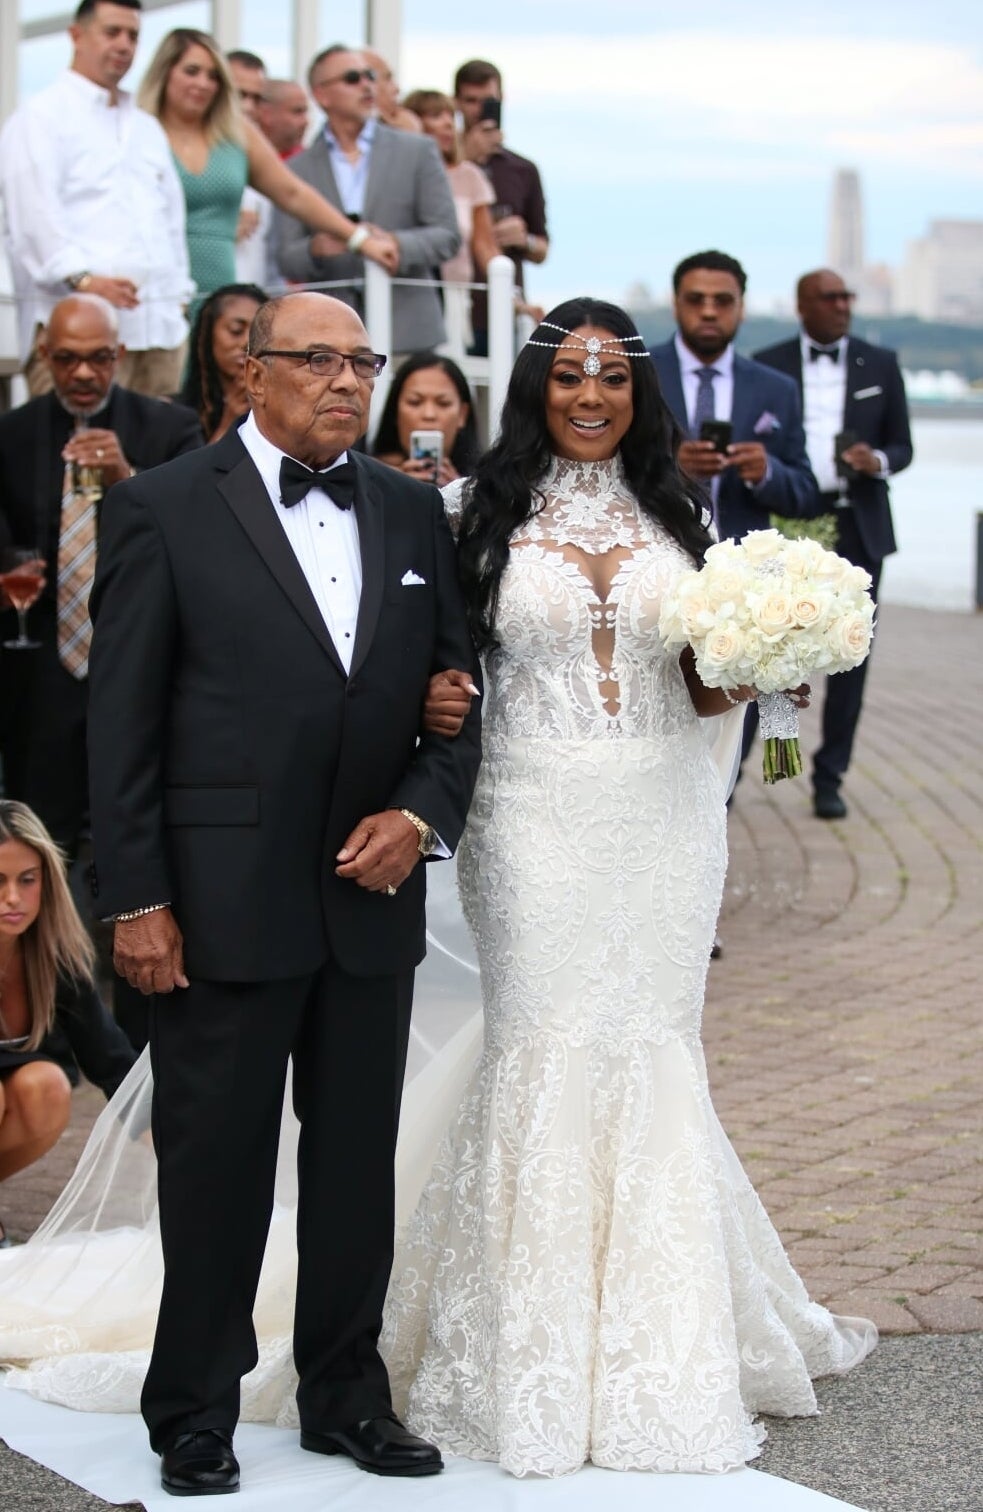 Bridal Bliss: Inside Treach Of Naughty By Nature And Cicely Evans's Stunning All-White Wedding